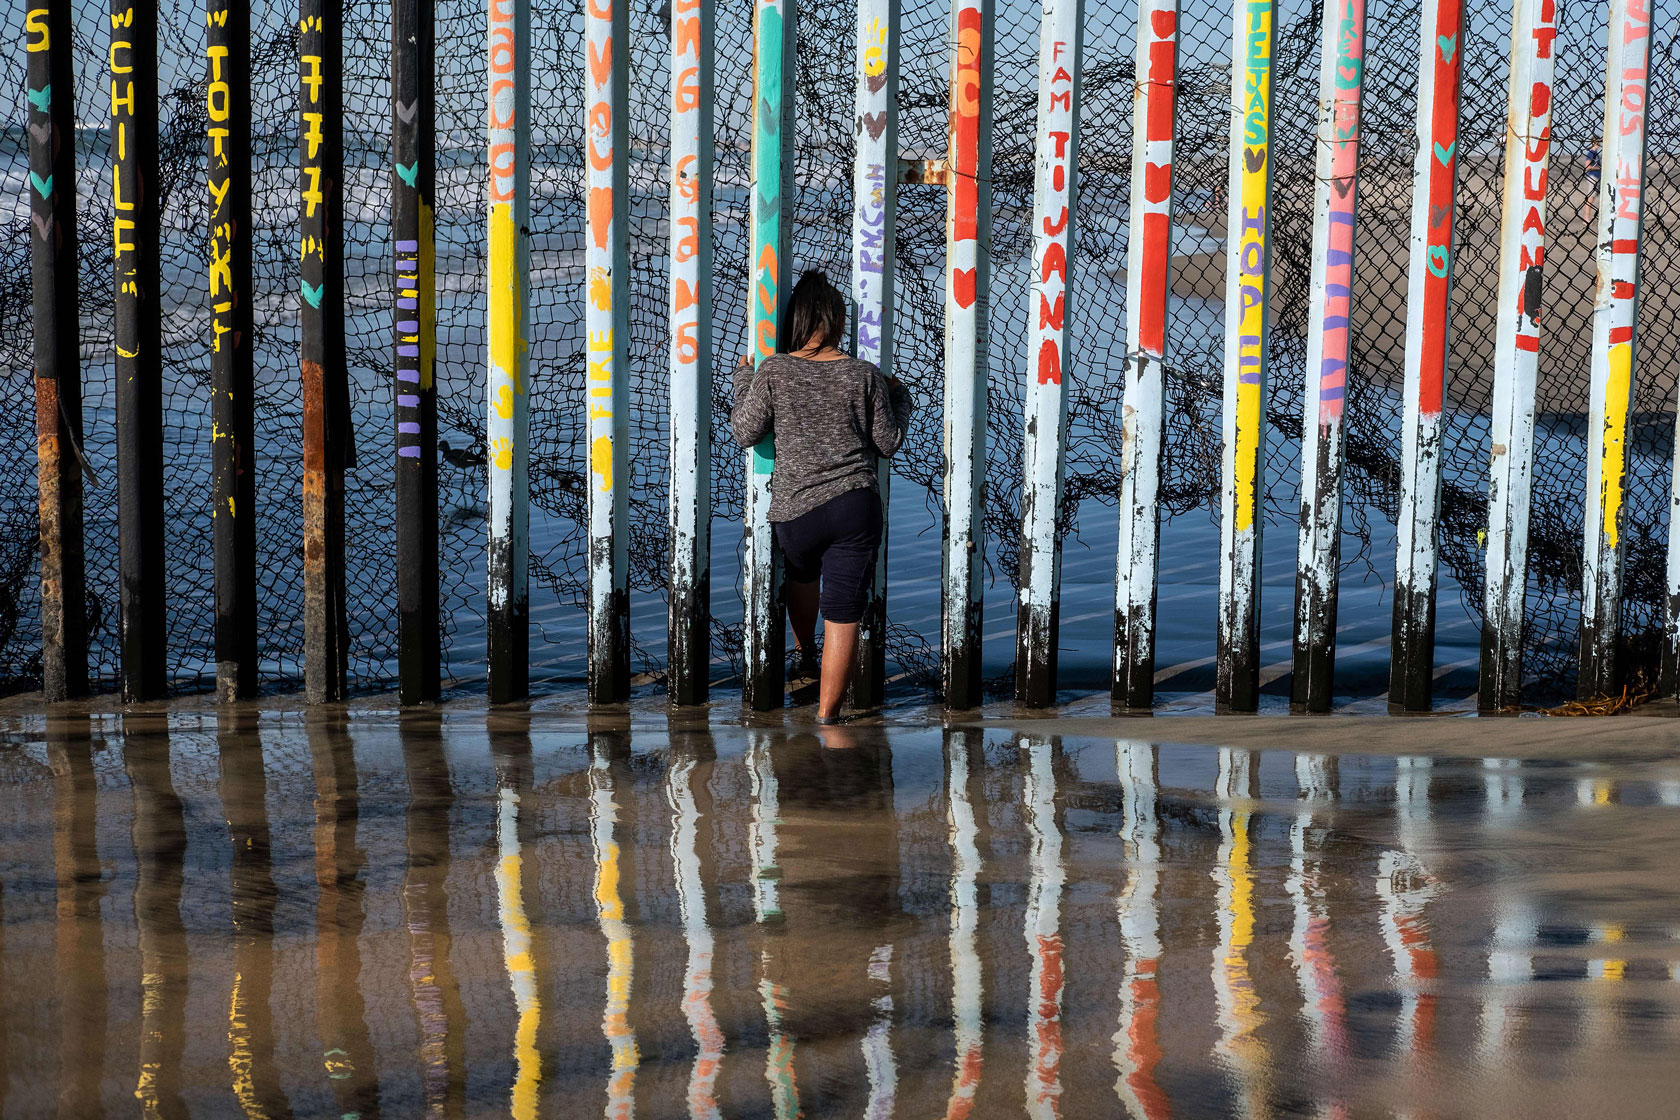 A young girl is alone on the beach and look through the graffiti-covered border fence.